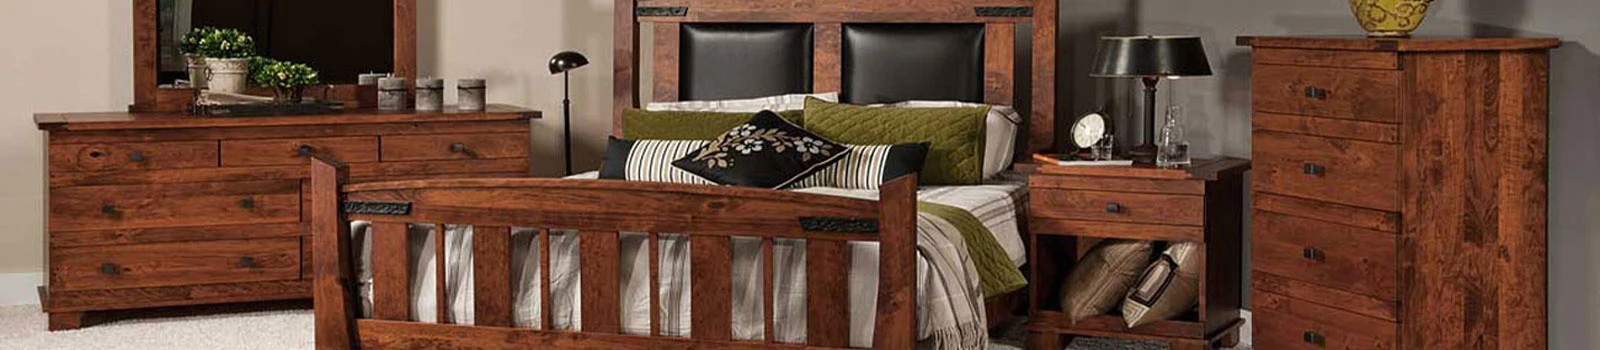 Special Price amish bedroom furniture